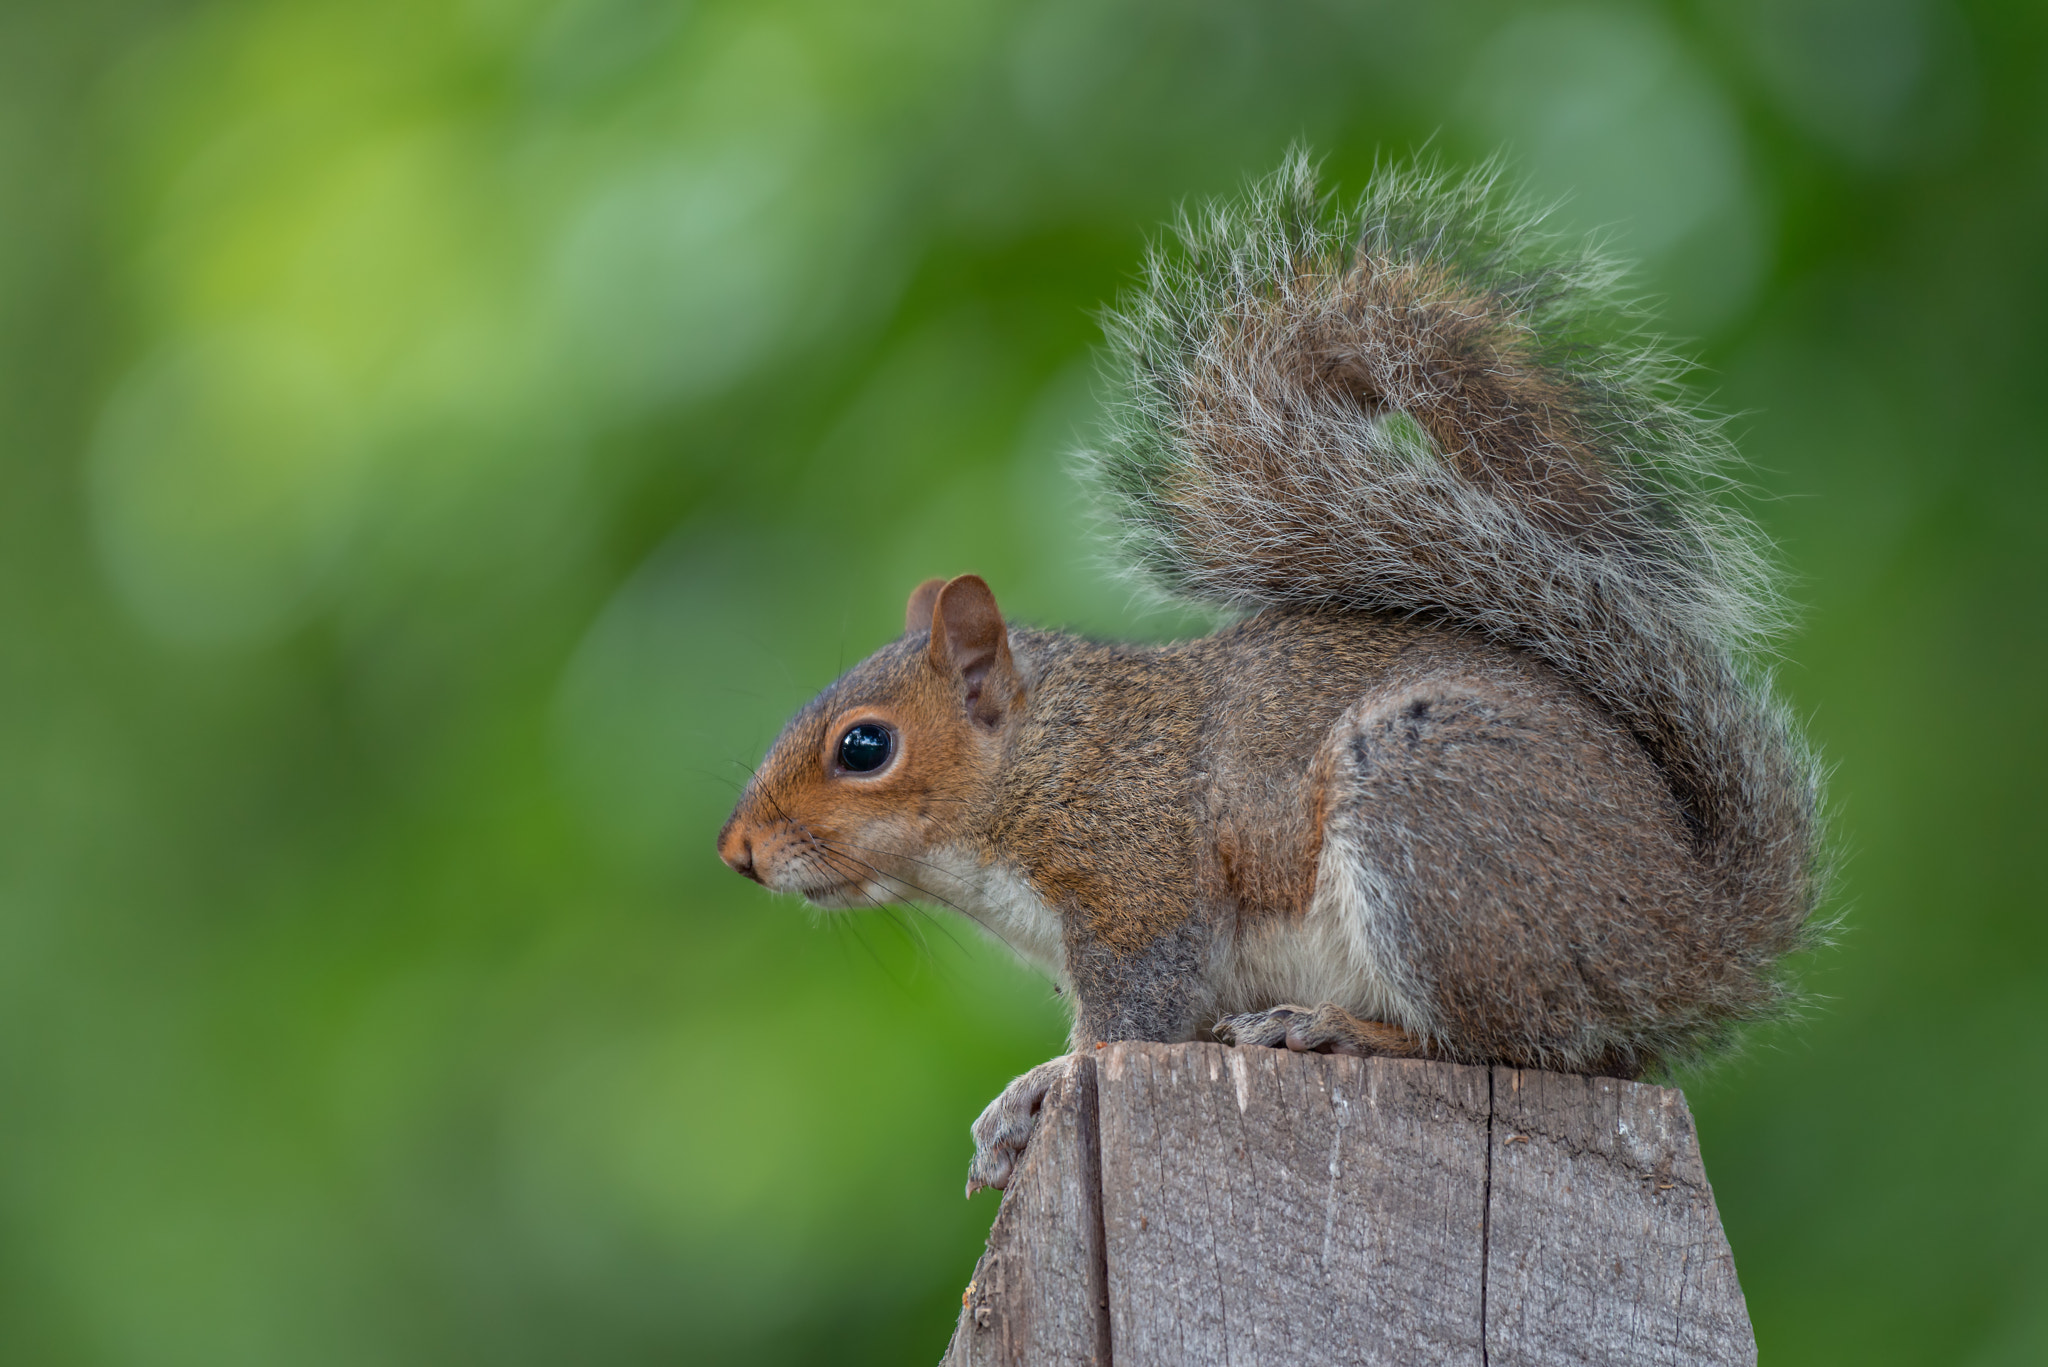 Nikon D800 sample photo. An eastern gray squirrel rests on a wooden pole photography